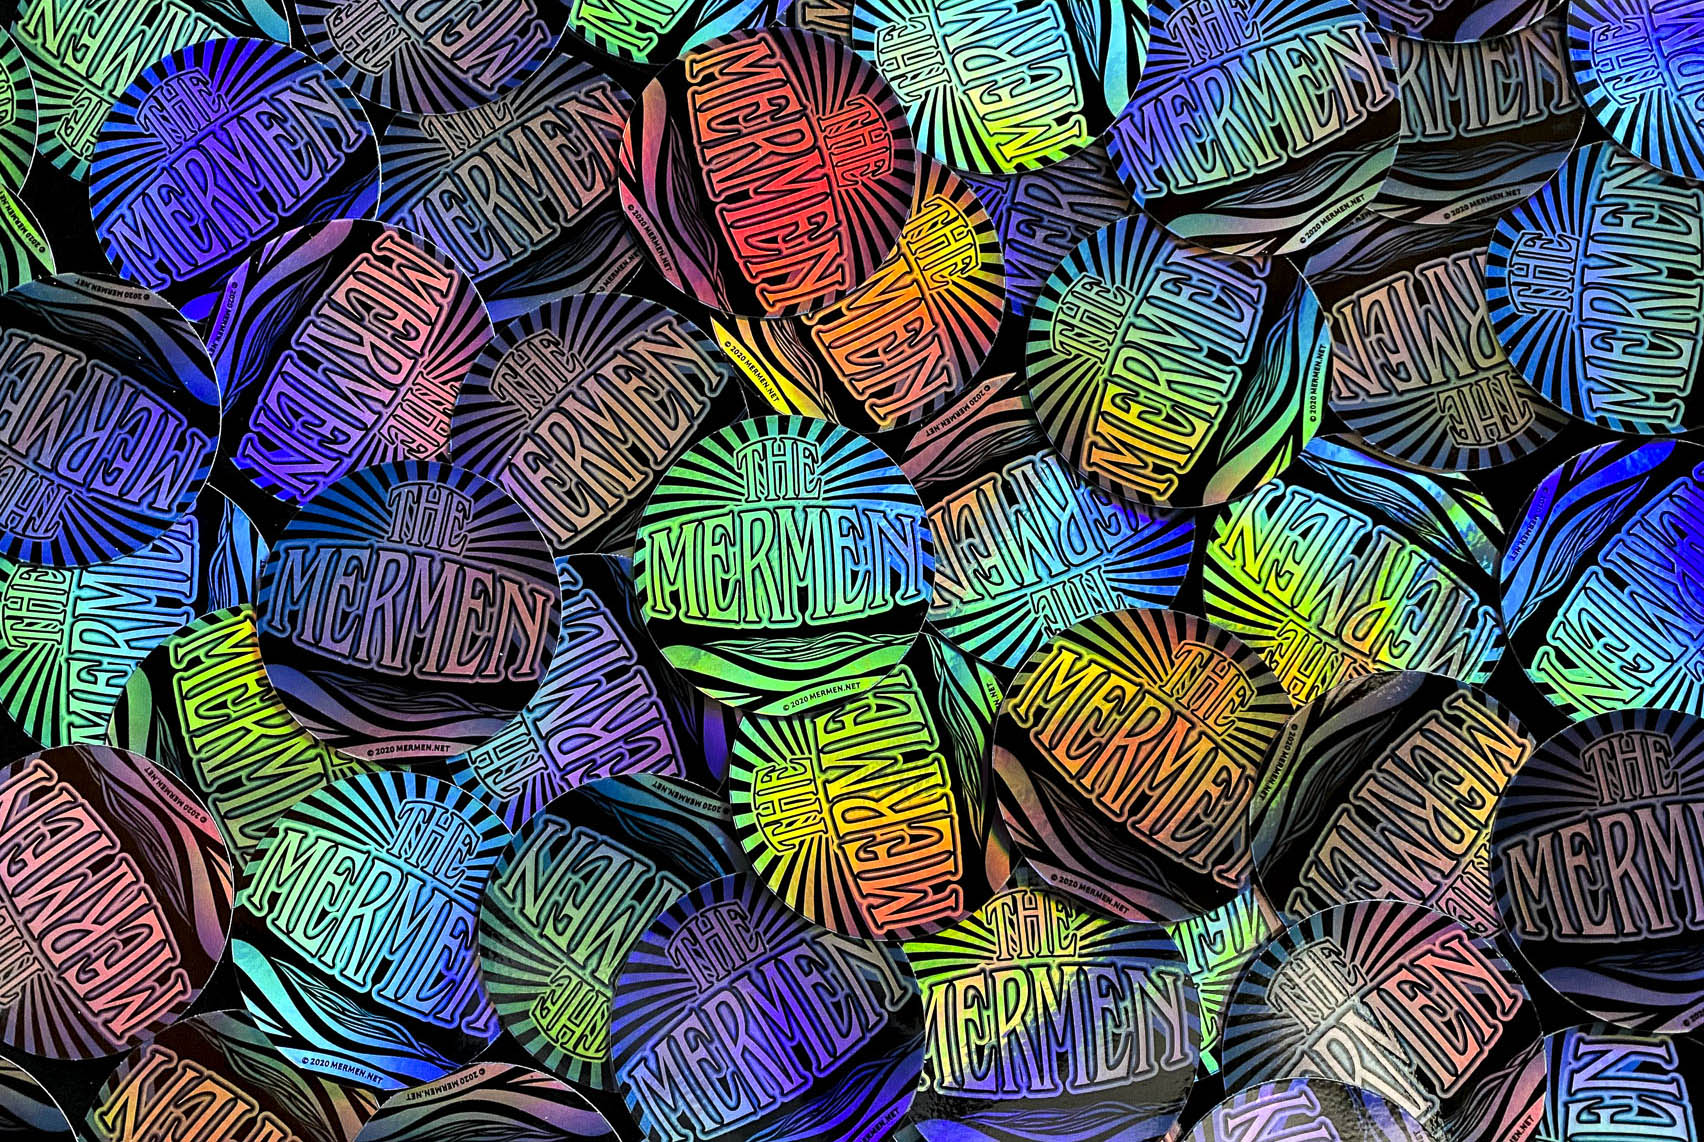 The Mermen Holographic Stickers. Sticker design and photo by emi